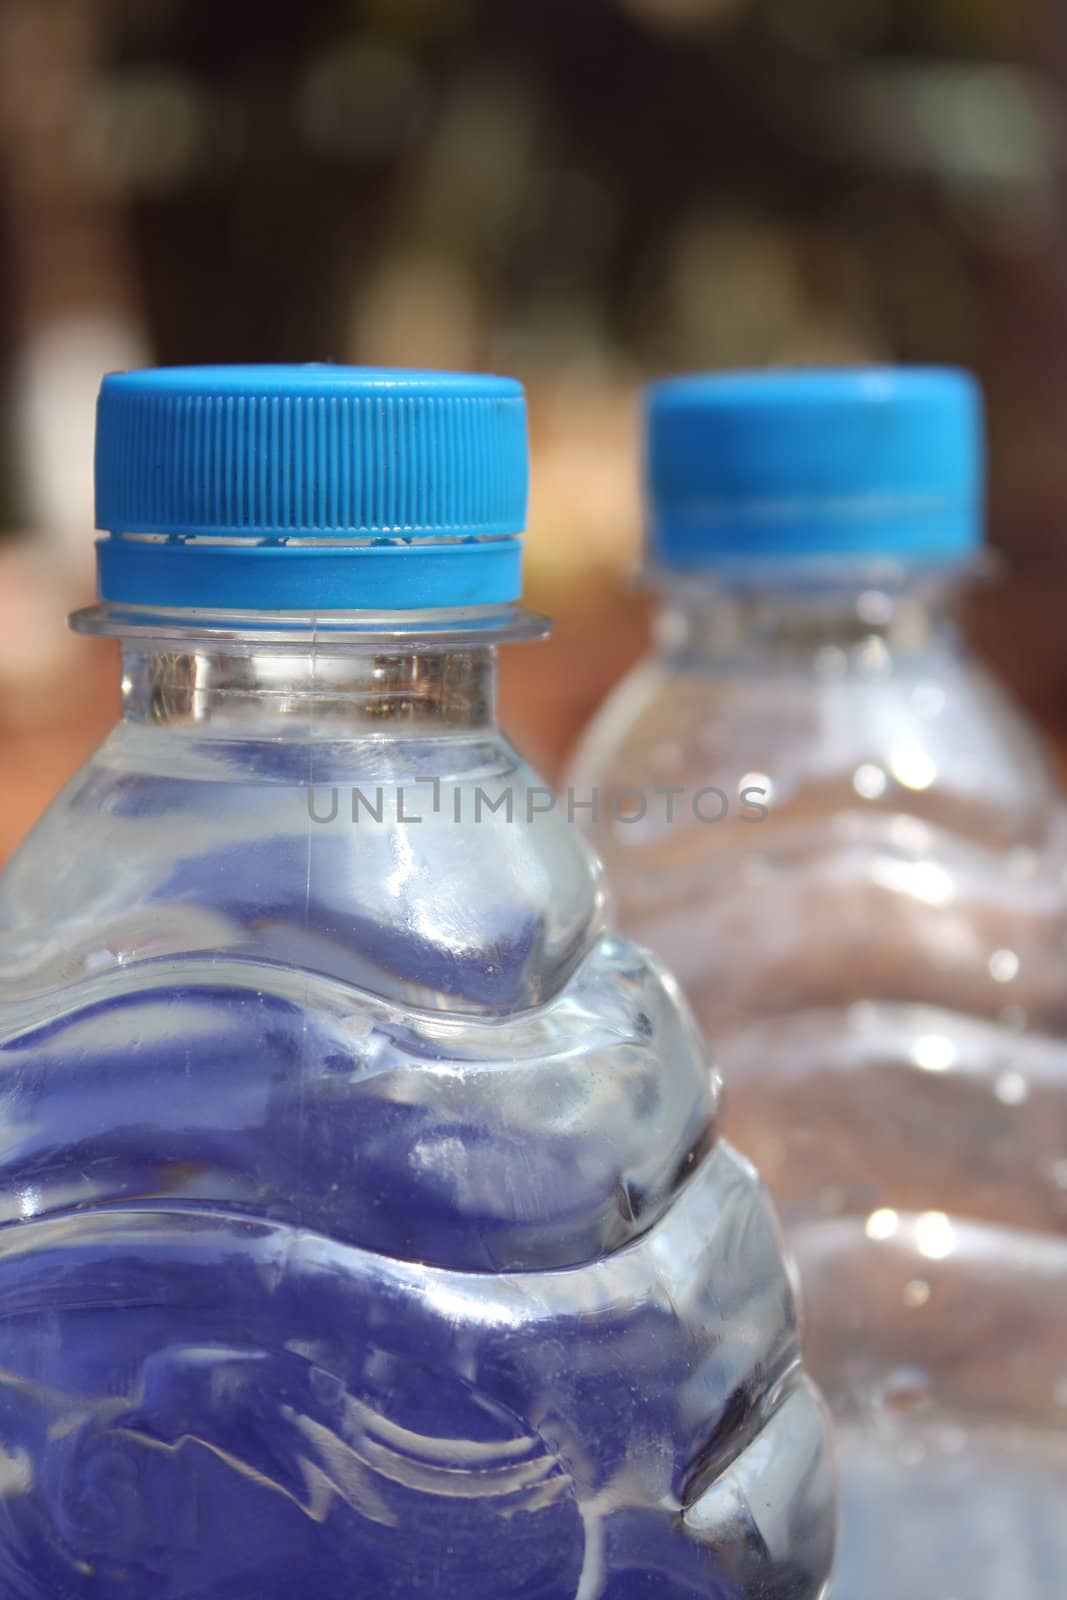 A view of the blue caps of mineral water bottles (Focus on cap).